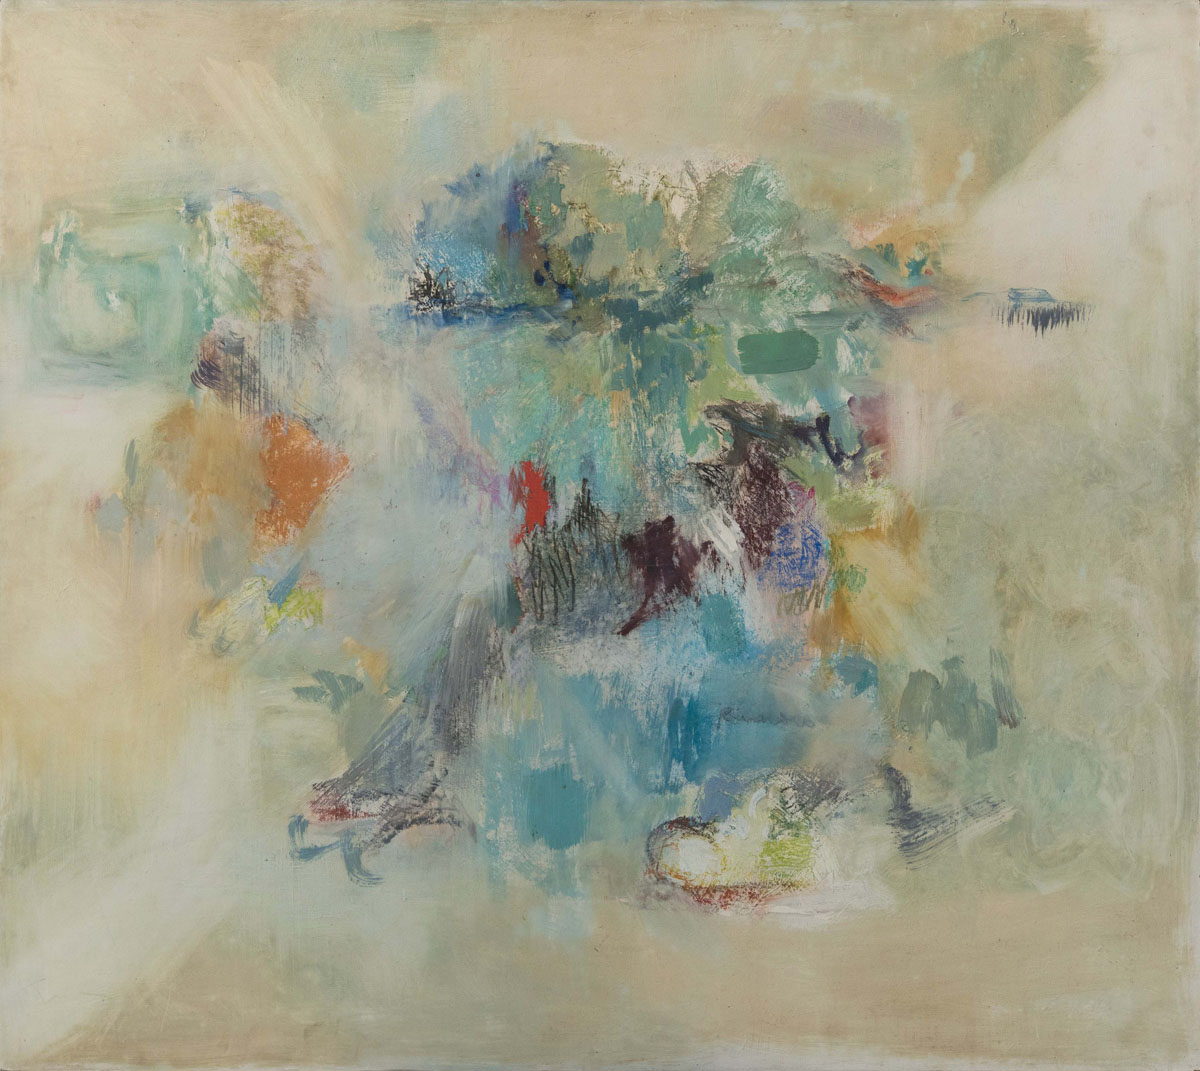 Dorothy Knowles, Memories of Home, 1962, oil on board, 48 x 54 inches. Courtesy of the artist.Faye HeavyShield, working form for new installation, 2018. Courtesy of the artist.Elaine Cameron-Weir, untitled, 2018, parachute silk, stainless steel and leather, 91.4 x 17.8 x 160 cm. Courtesy of the artist and Hannah Hoffman, Los Angeles.